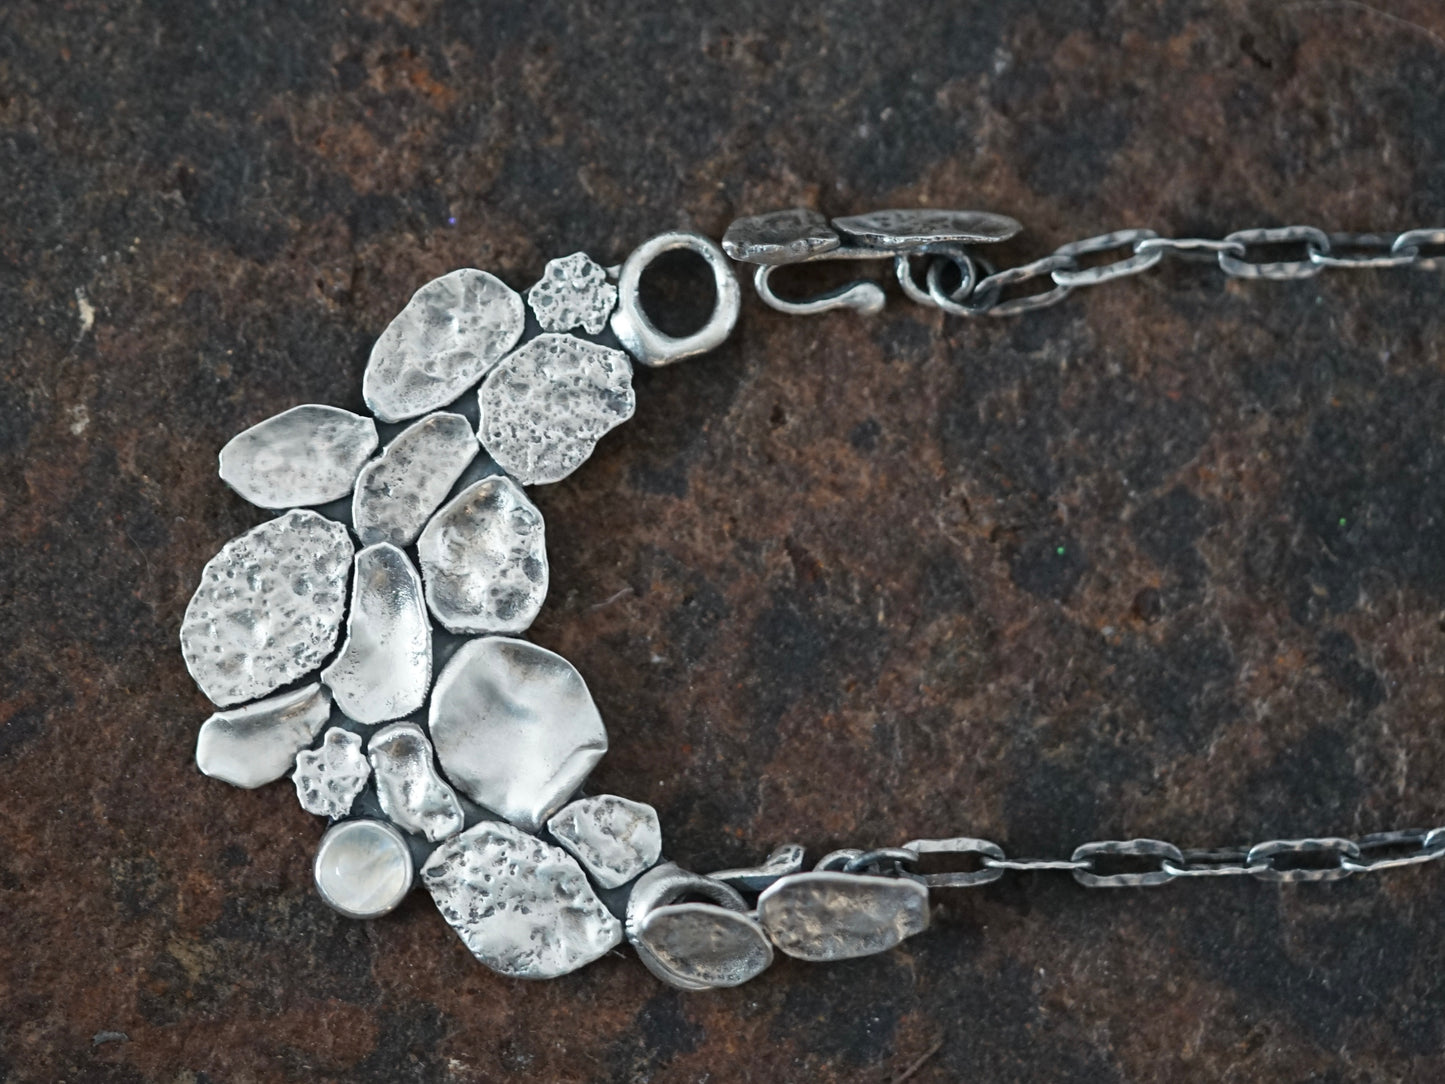 Silver cloud and moonstone necklace